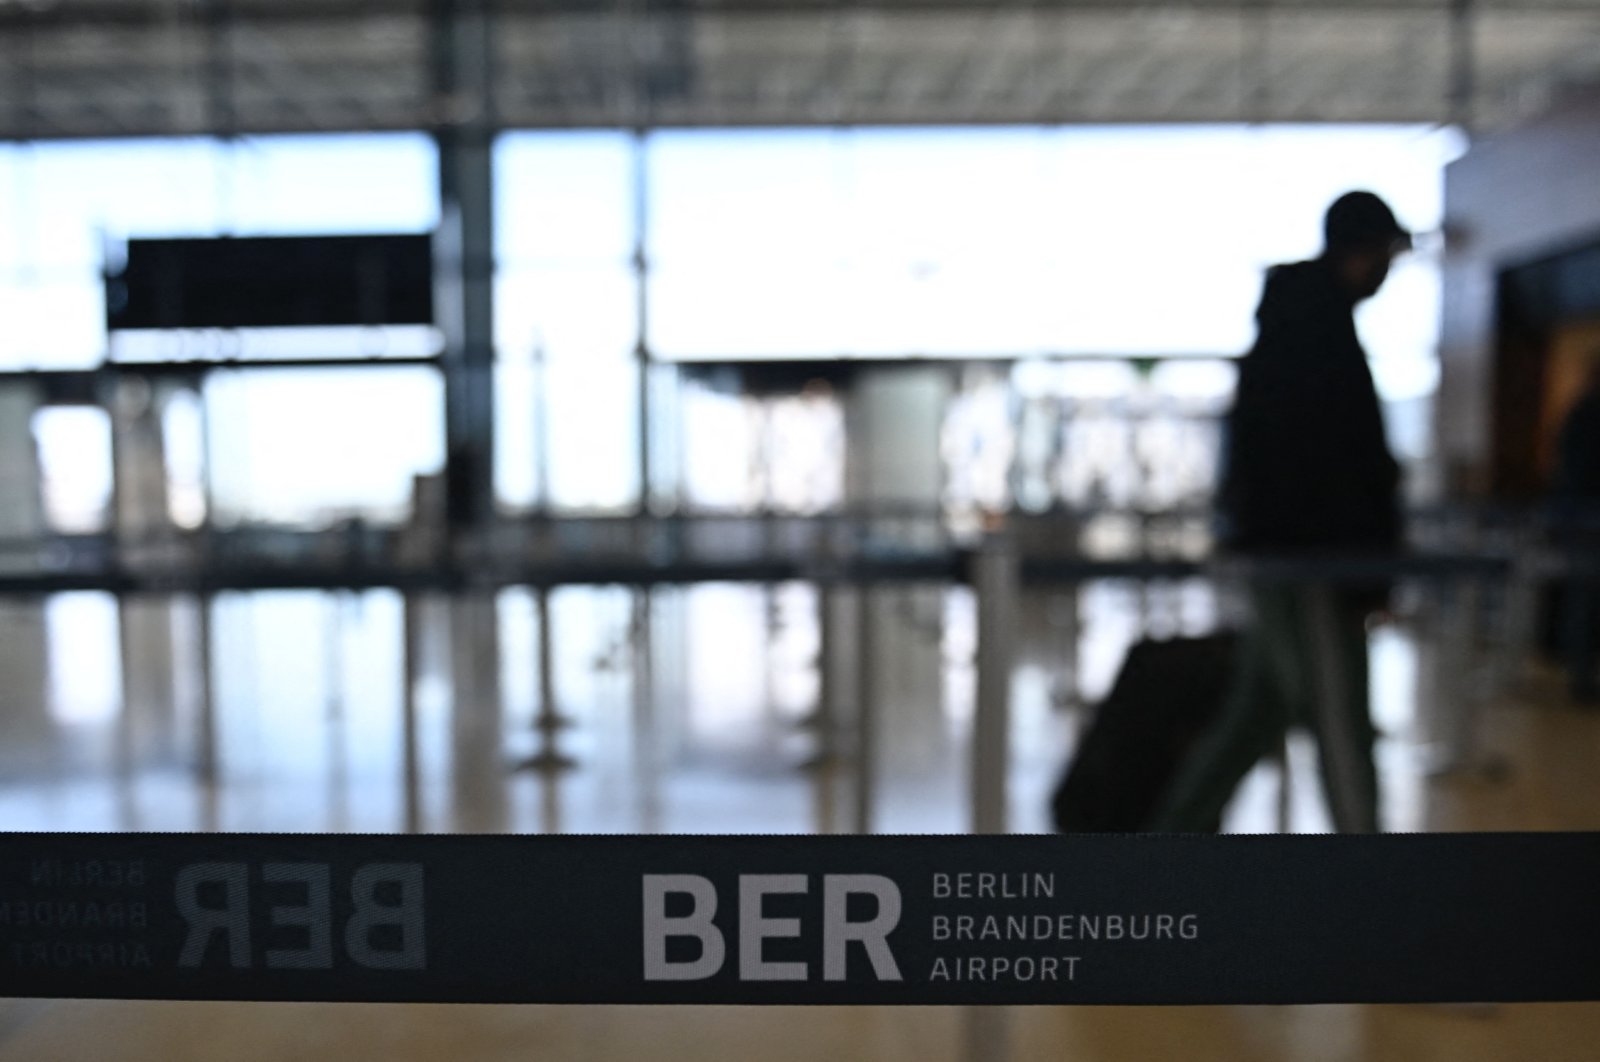 A passenger is pictured at Terminal 1 of Berlin Brandenburg "Willy Brandt" airport in Brandenburg, near Schonefeld and Berlin, Germany, Feb. 20, 2021. (AFP File Photo)